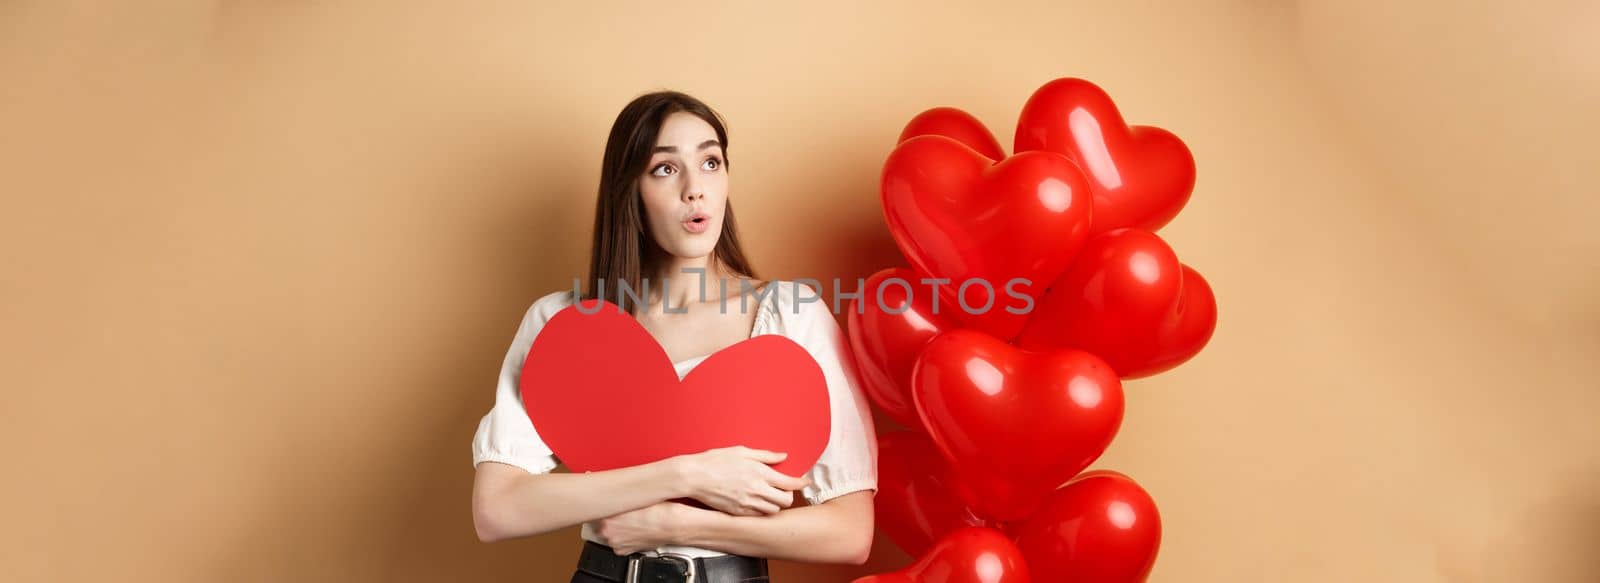 Valentines day and love concept. Intrigued tender girl hugging big red heart cutout and stand near balloons, looking aside at logo, saying wow, beige background.